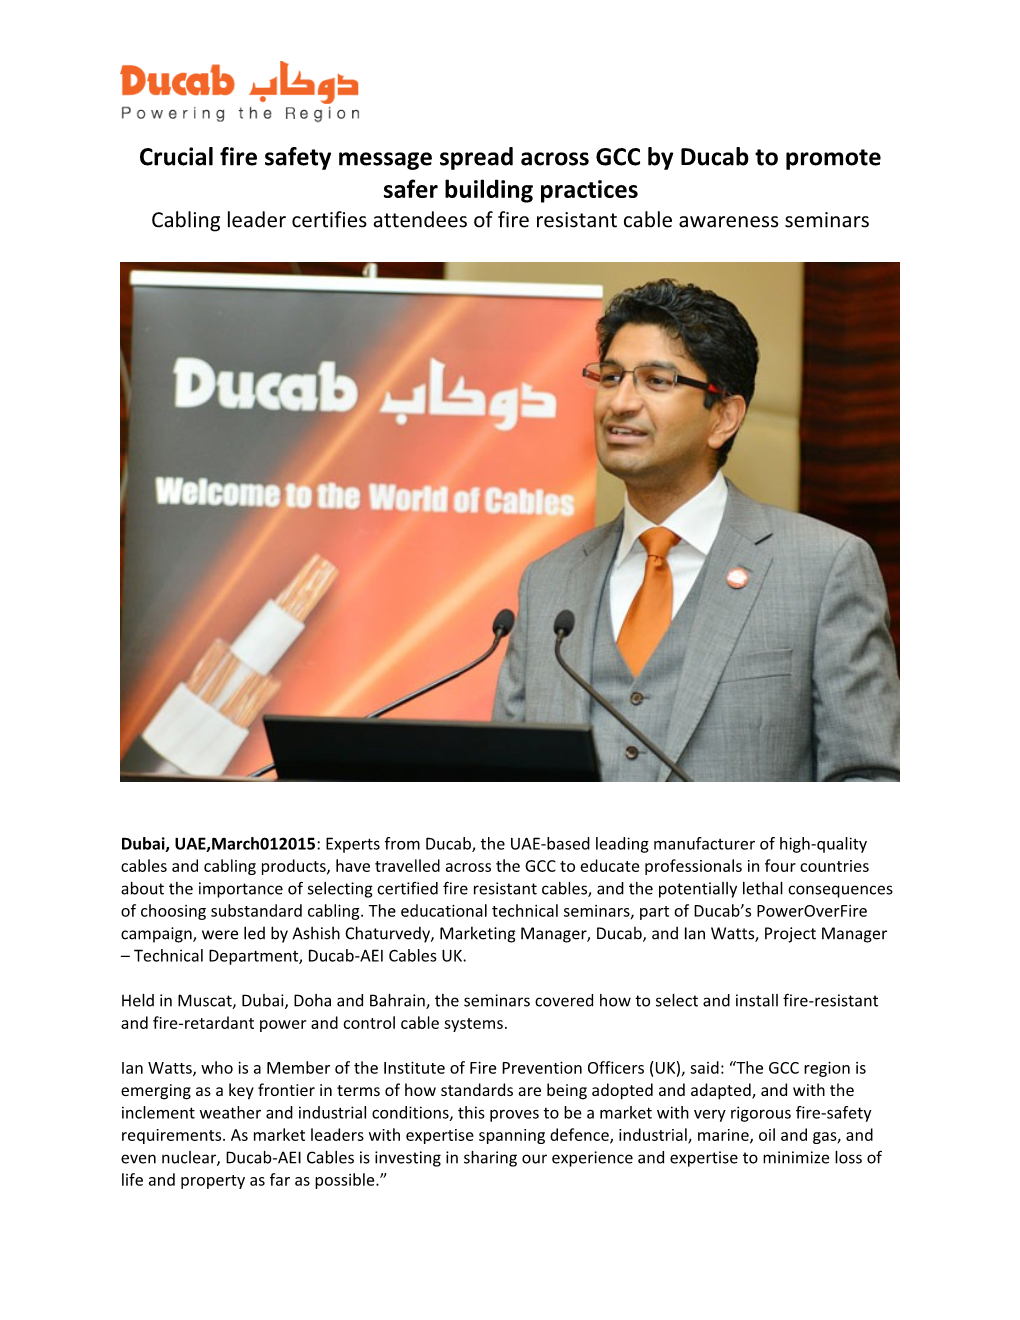 Crucial Fire Safety Message Spread Across GCC by Ducab to Promote Safer Building Practices